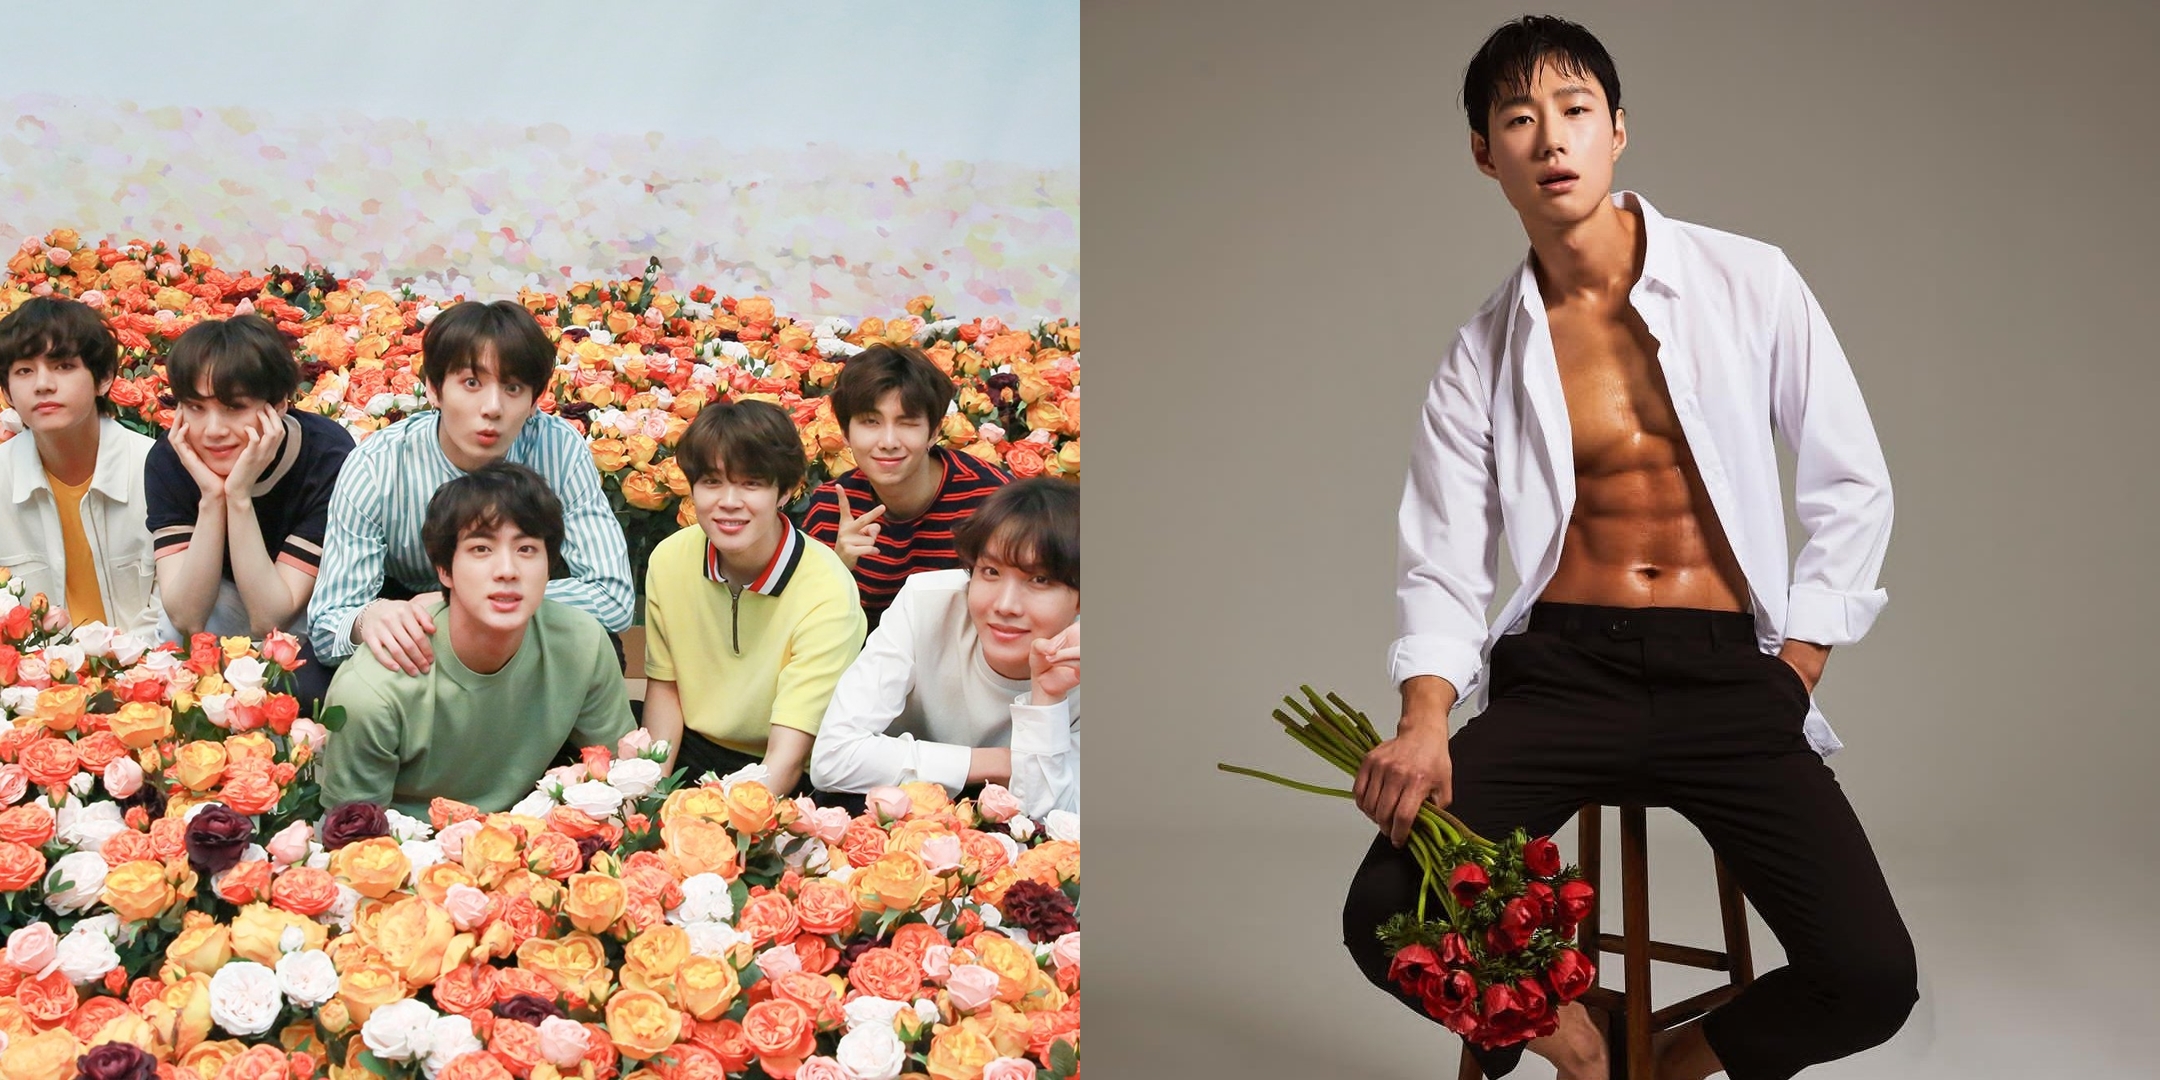 BTS Makes This Flower Seller Go Viral, Secretly Turns Out to Be a Professional Model and Former Idol Trainee